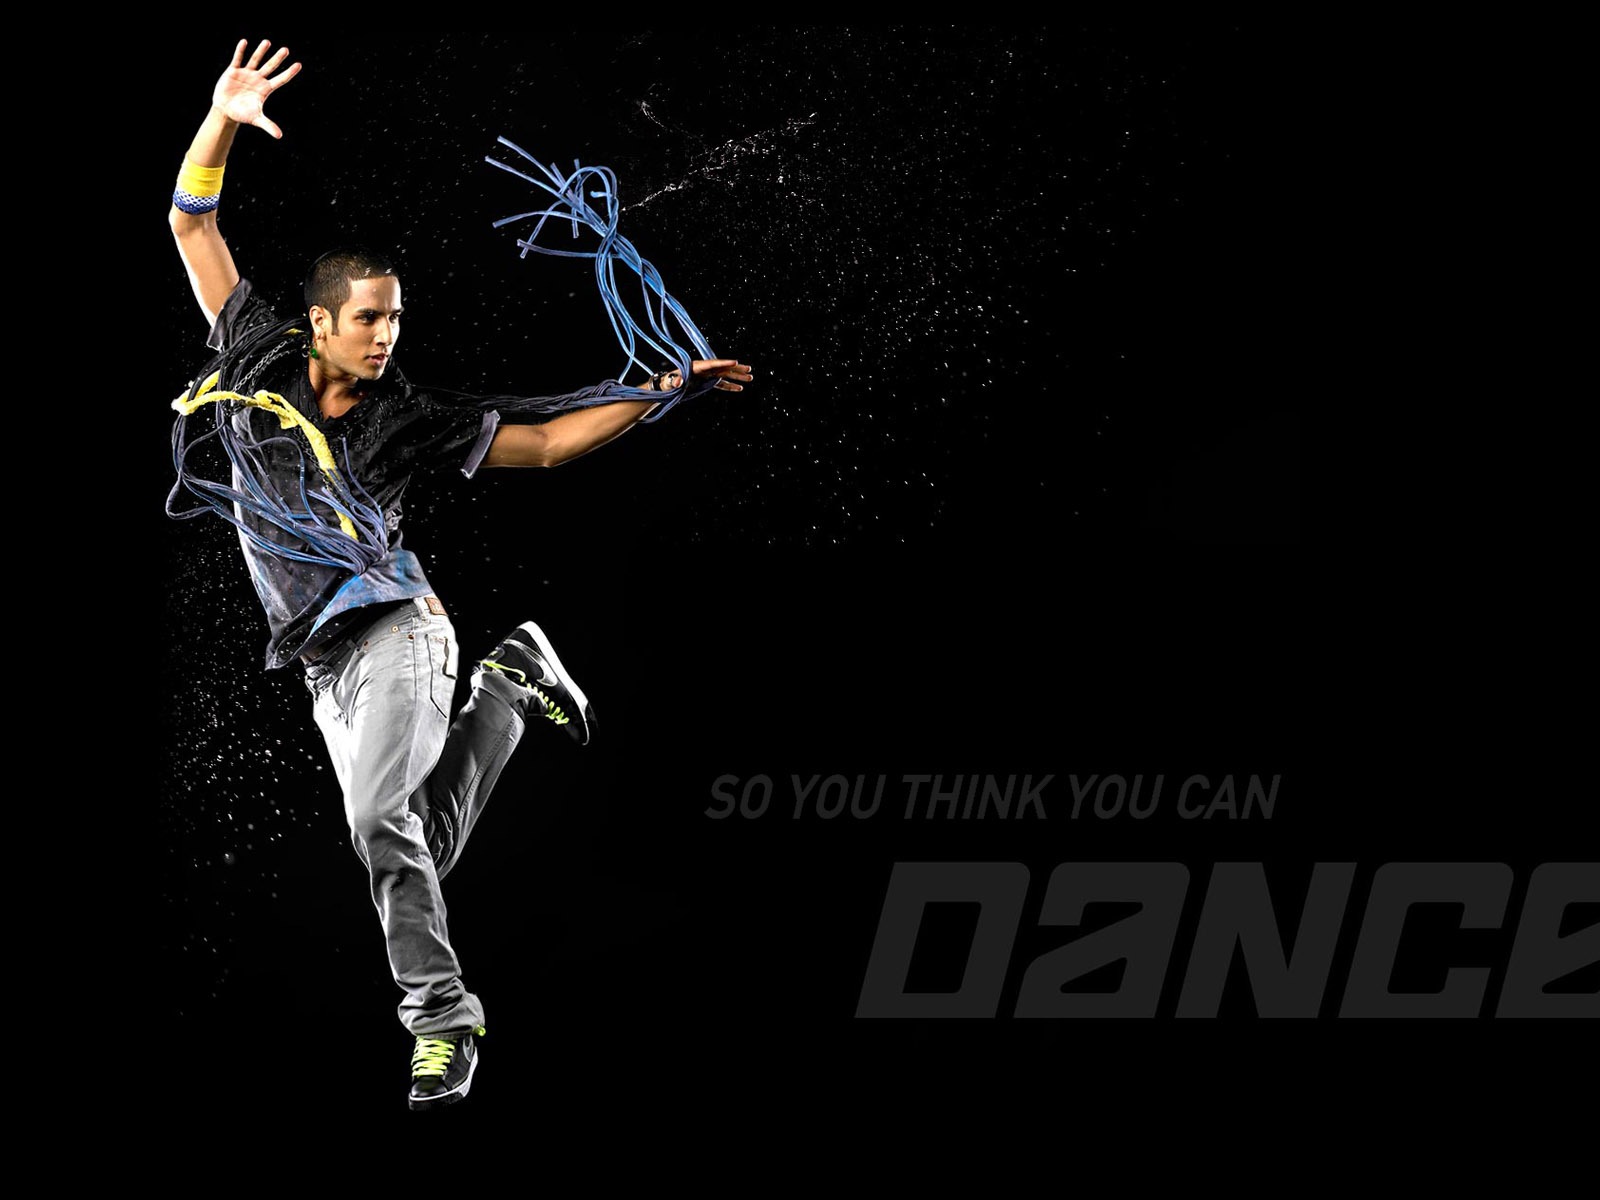 So You Think You Can Dance Wallpaper (1) #4 - 1600x1200